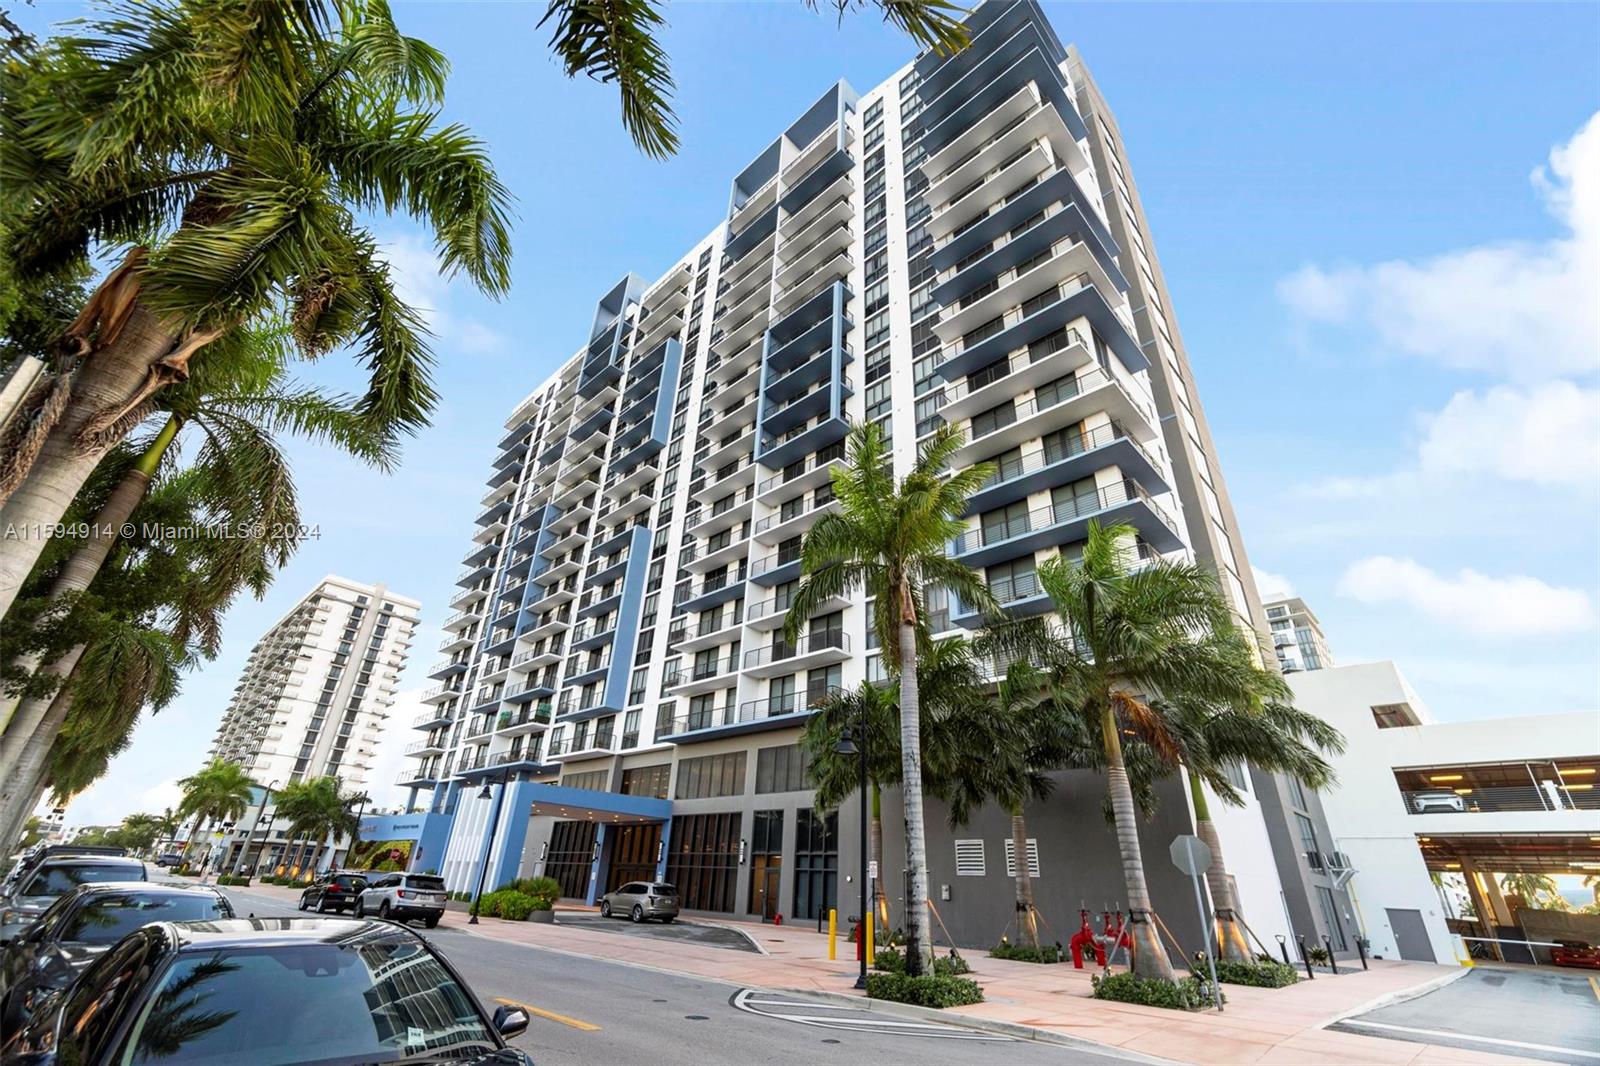 Welcome to your dream condo at 5350 Park in Downtown Doral. This exquisite unit features 3 bedrooms, 3 full bathrooms, a spacious kitchen with quartz countertops and stainless steel appliances, 2 parking spots, and 24/7 valet parking. An excellent option for investors, this unit allows short-term rentals and can be divided into two separate units with independent entrances: one with 2 bedrooms and 2 bathrooms, and the other with 1 bedroom and 1 bathroom, making it perfect for a profitable business.
This stunning high-rise building offers top-notch amenities, including a pool, gym, kids' playroom, 24-hour security, and more. Enjoy gorgeous views of Doral and spectacular sunsets, just steps from restaurants, schools, and supermarkets, with quick access to major highways. VERY EASY TO SHOW!